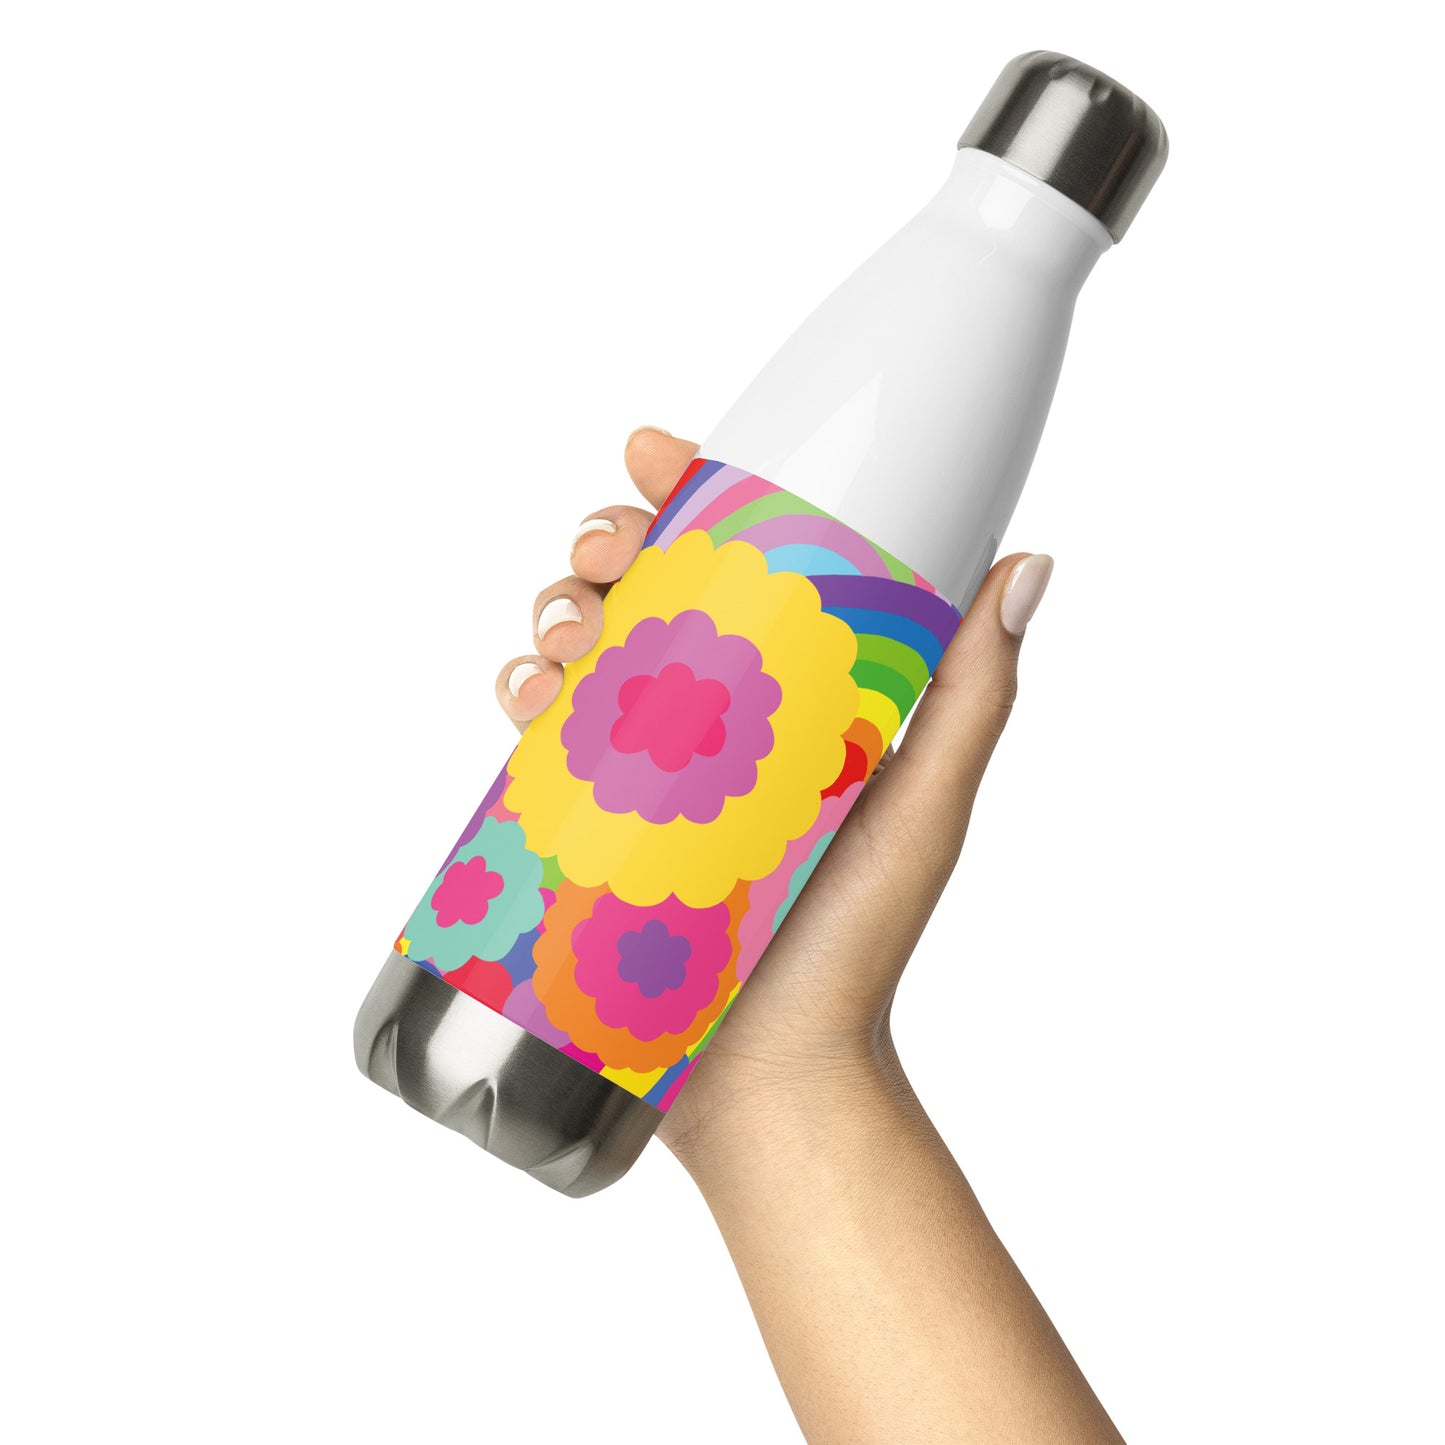 "Optimism Blossoms" Floral Close-up Stainless Steel Water Bottle